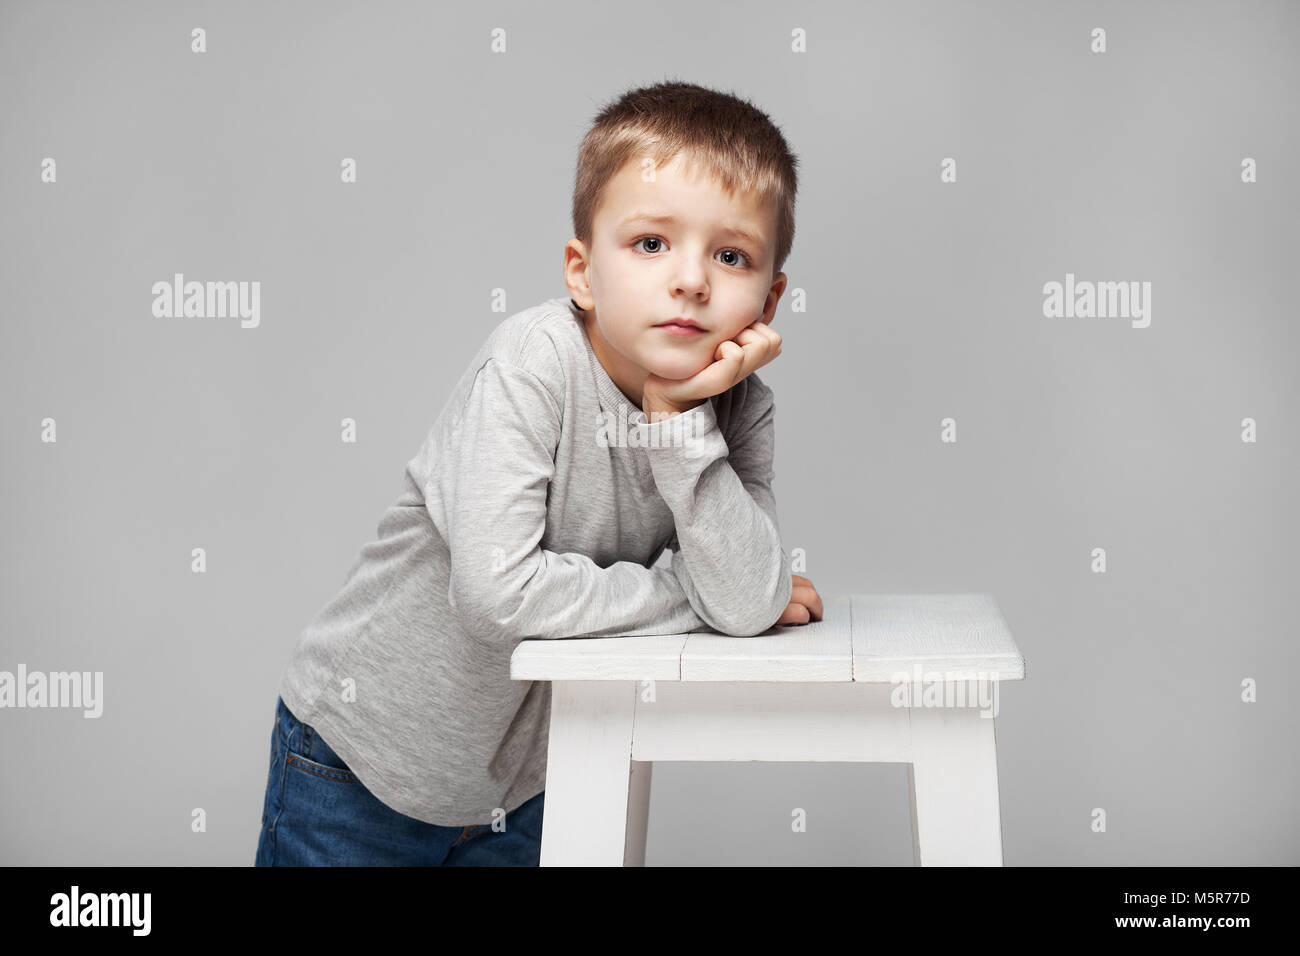 Portrait of a cute boy with standing at the chair in the photostudio on grey background Stock Photo